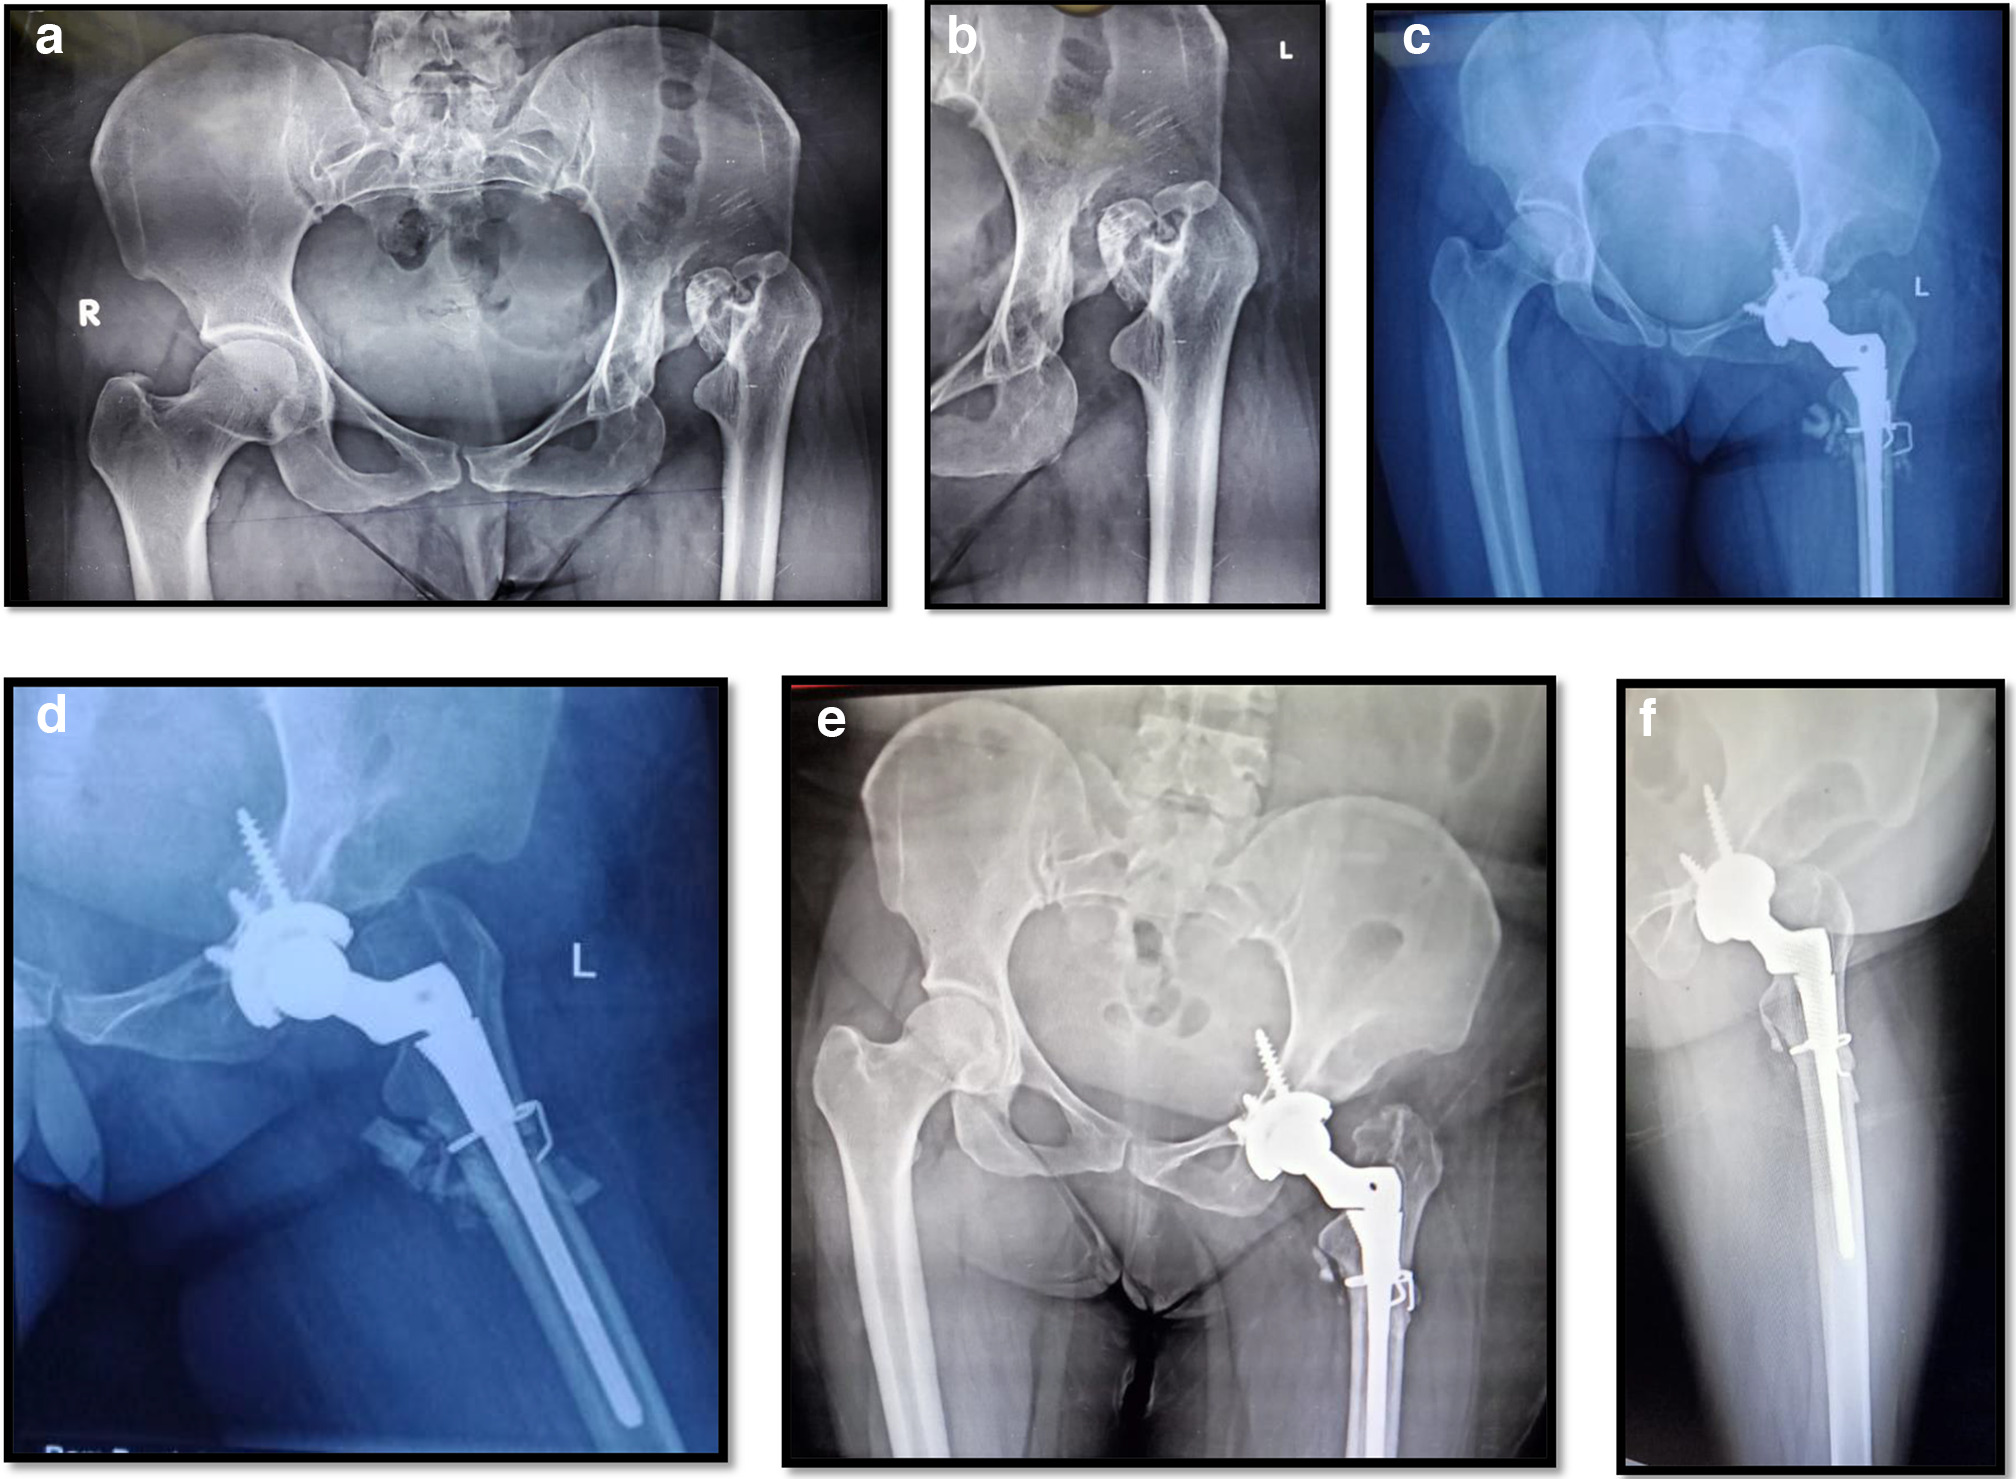 Fig. 1 
          a) Preoperative anterioposterior (AP) radiograph showing the dislocating type of hip following septic arthritis. b) Preoperative lateral radiograph showing the dislocating type of hip following septic arthritis. c) Postoperative AP radiograph showing total hip arthroplasty (THA) along with subtrochanteric osteotomy. d) Postoperative lateral view showing THA in situ. e) Follow-up AP radiolograph showing well-fixed prosthesis and union of osteotomy site. f) Follow-up lateral radiological showing well-fixed prosthesis and union of osteotomy site.
        